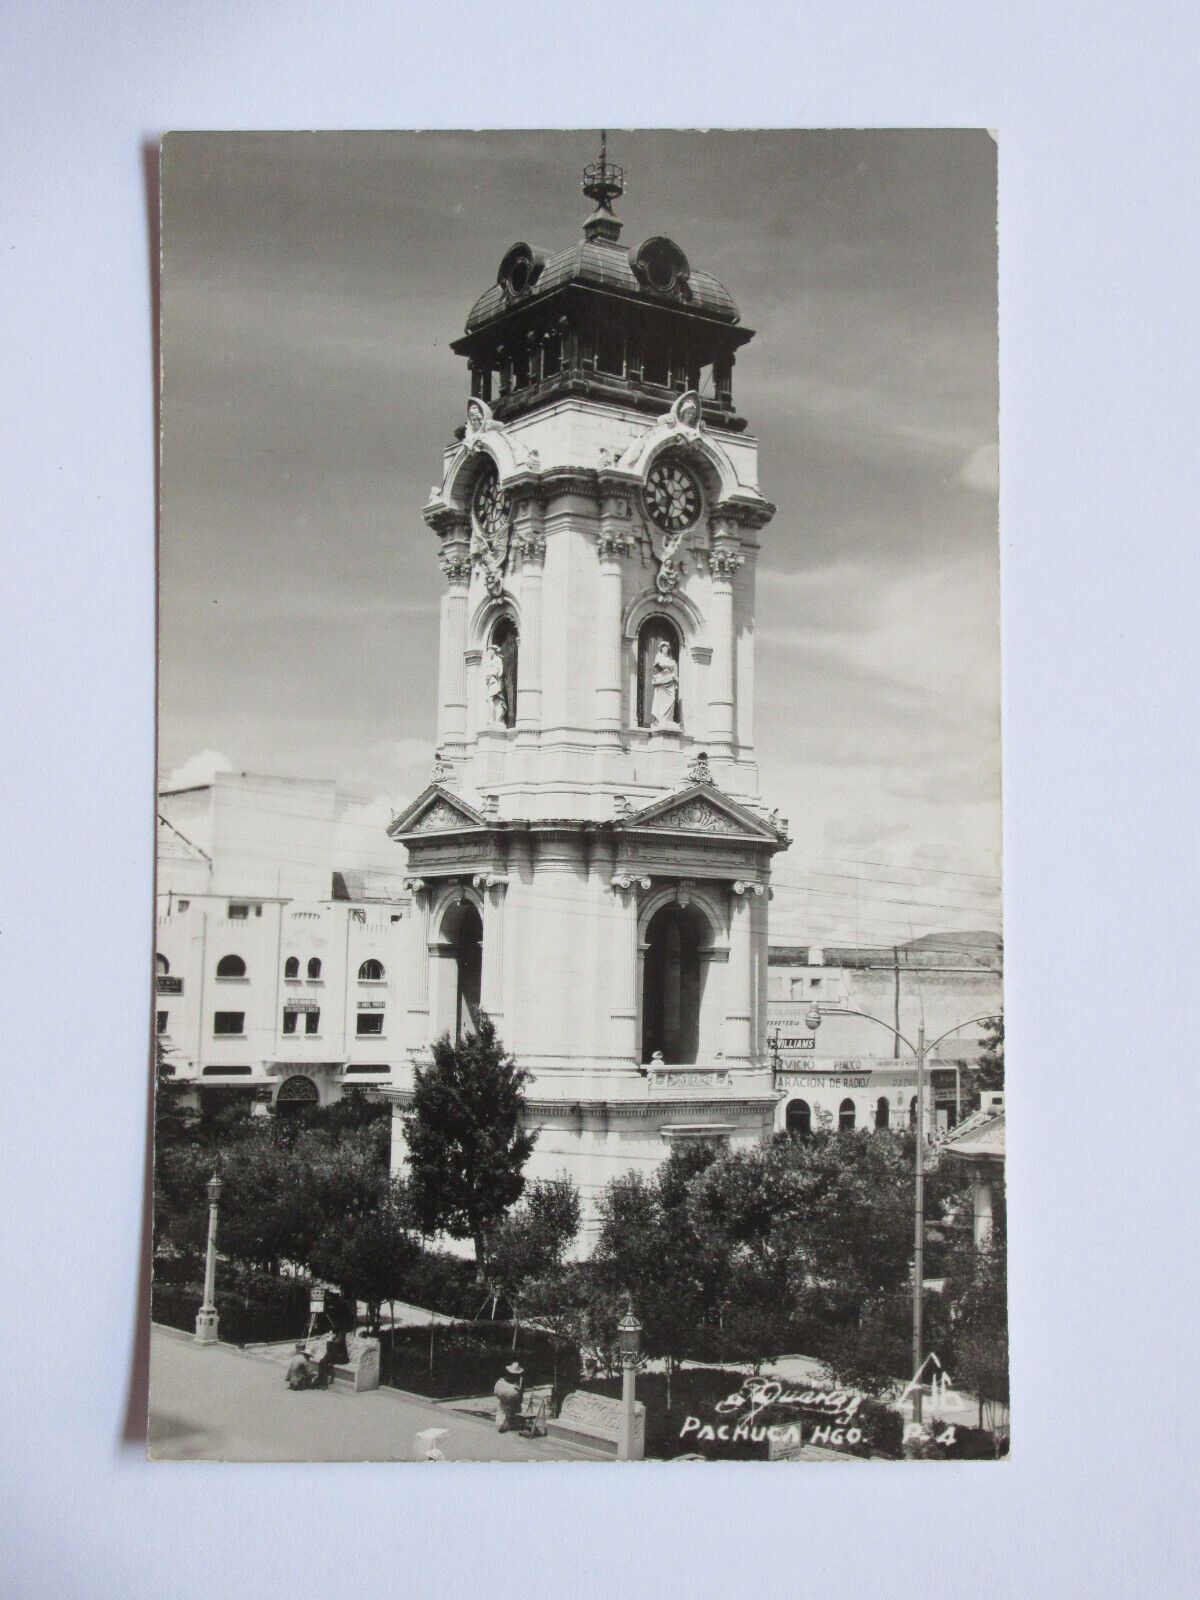 1961 View of Pachuca MEXICO Vintage Real Photo Postcard